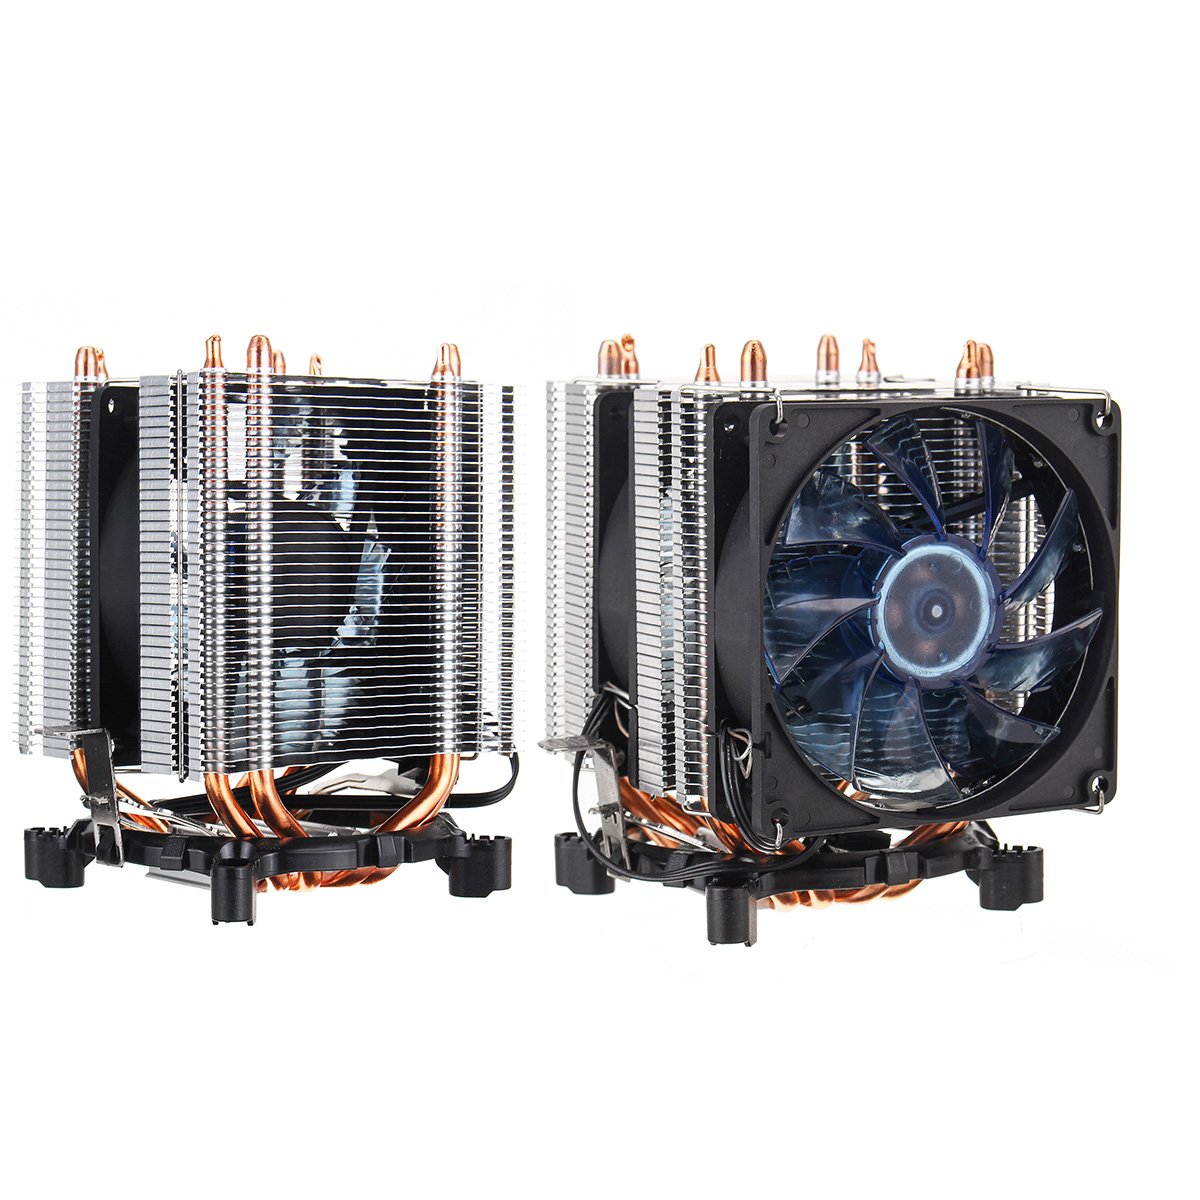 3 Pin Four Copper Pipes Blue Backlit CPU Cooling Fan for AMD for Intel 1155 1156 1